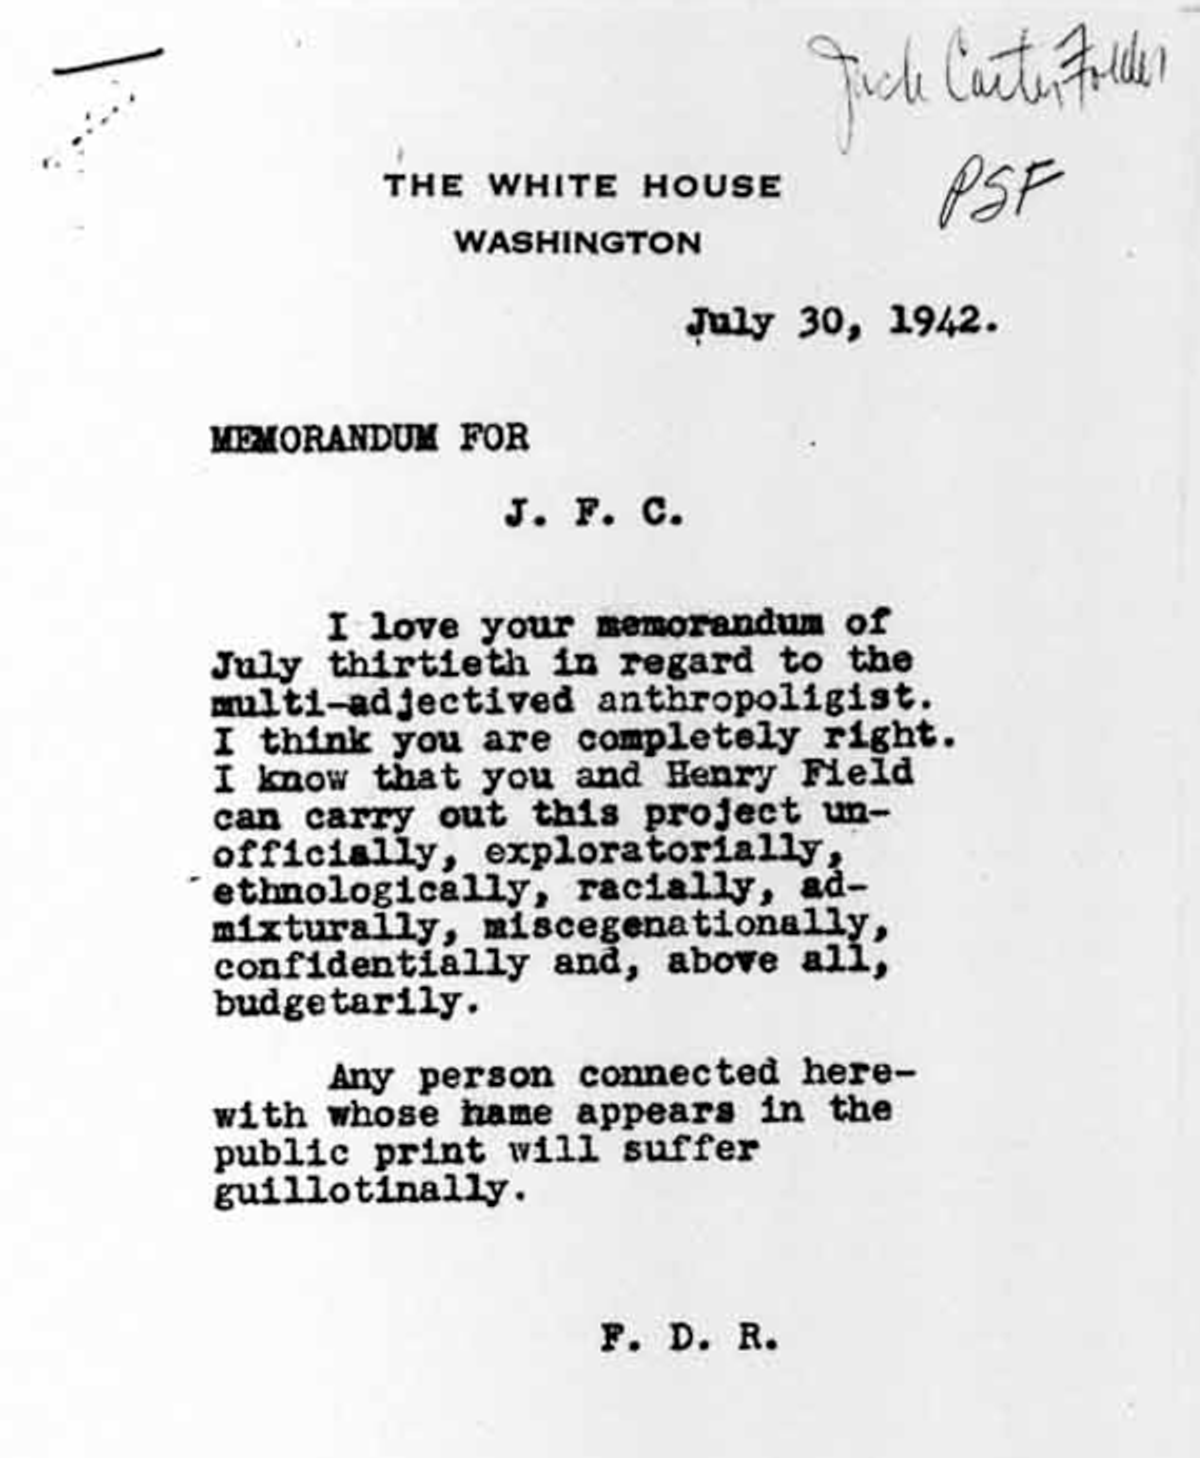 Memo from FDR to John Franklin Carter authorizing the M Project, July 30, 1942. 